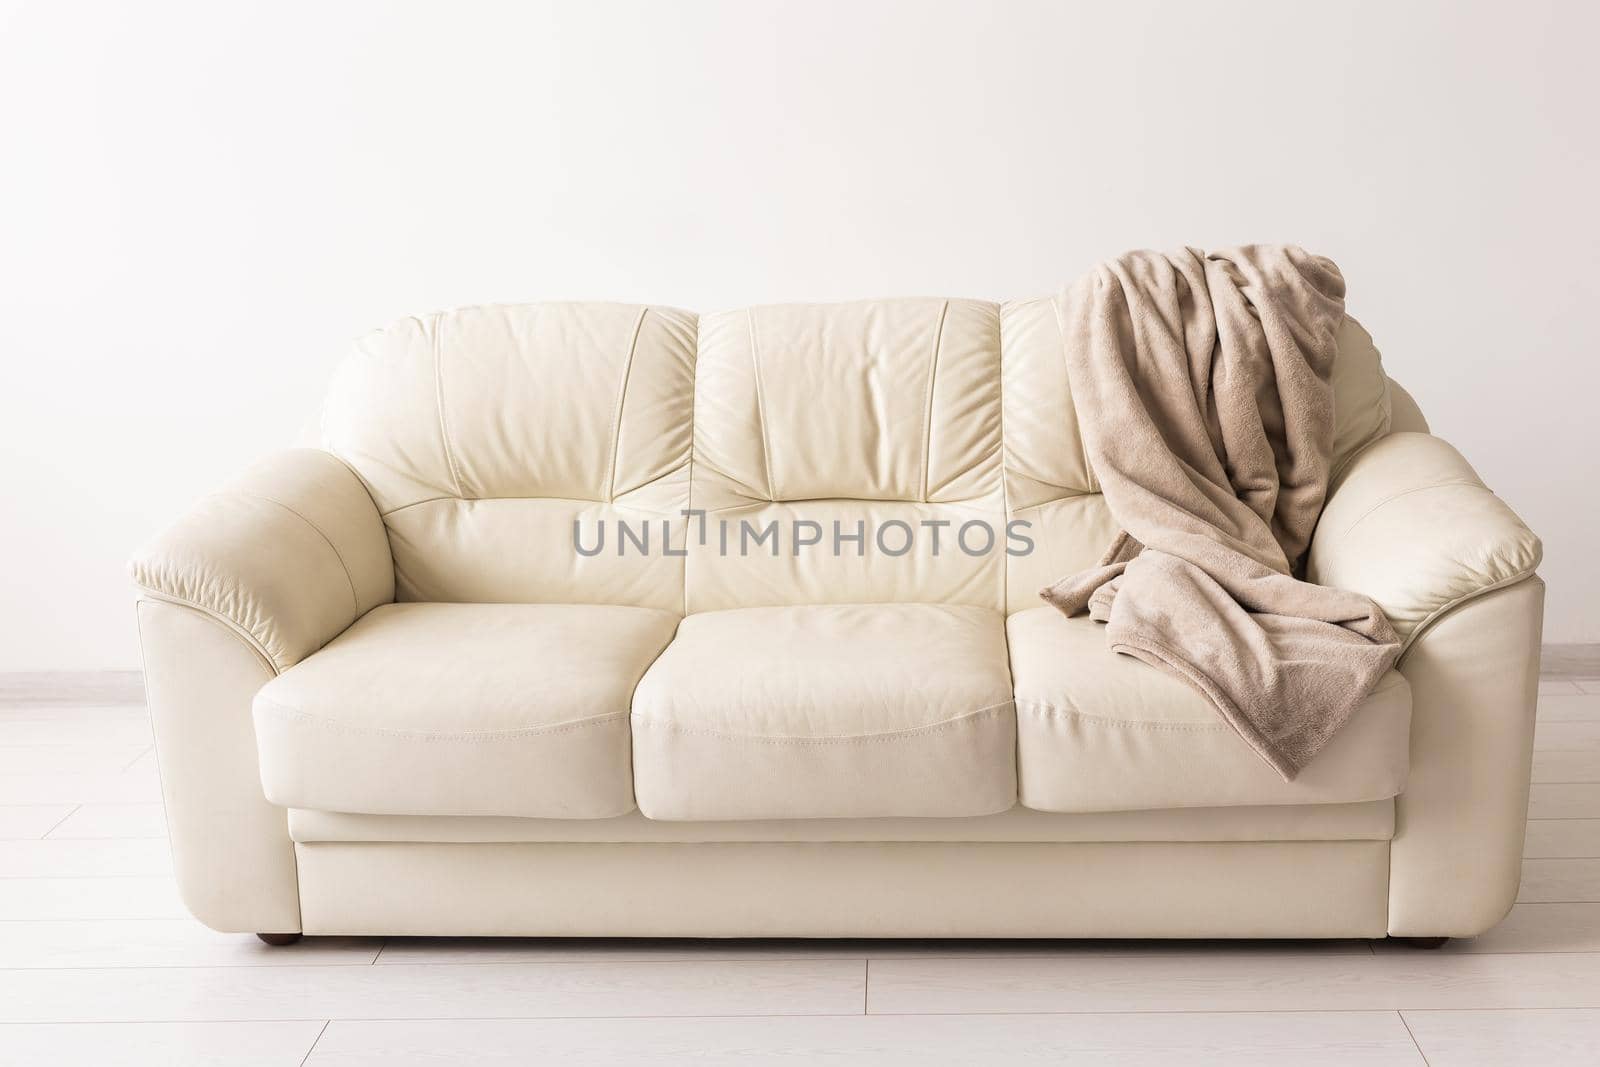 Beige sofa in room on white background. Simple minimalistic design. by Satura86